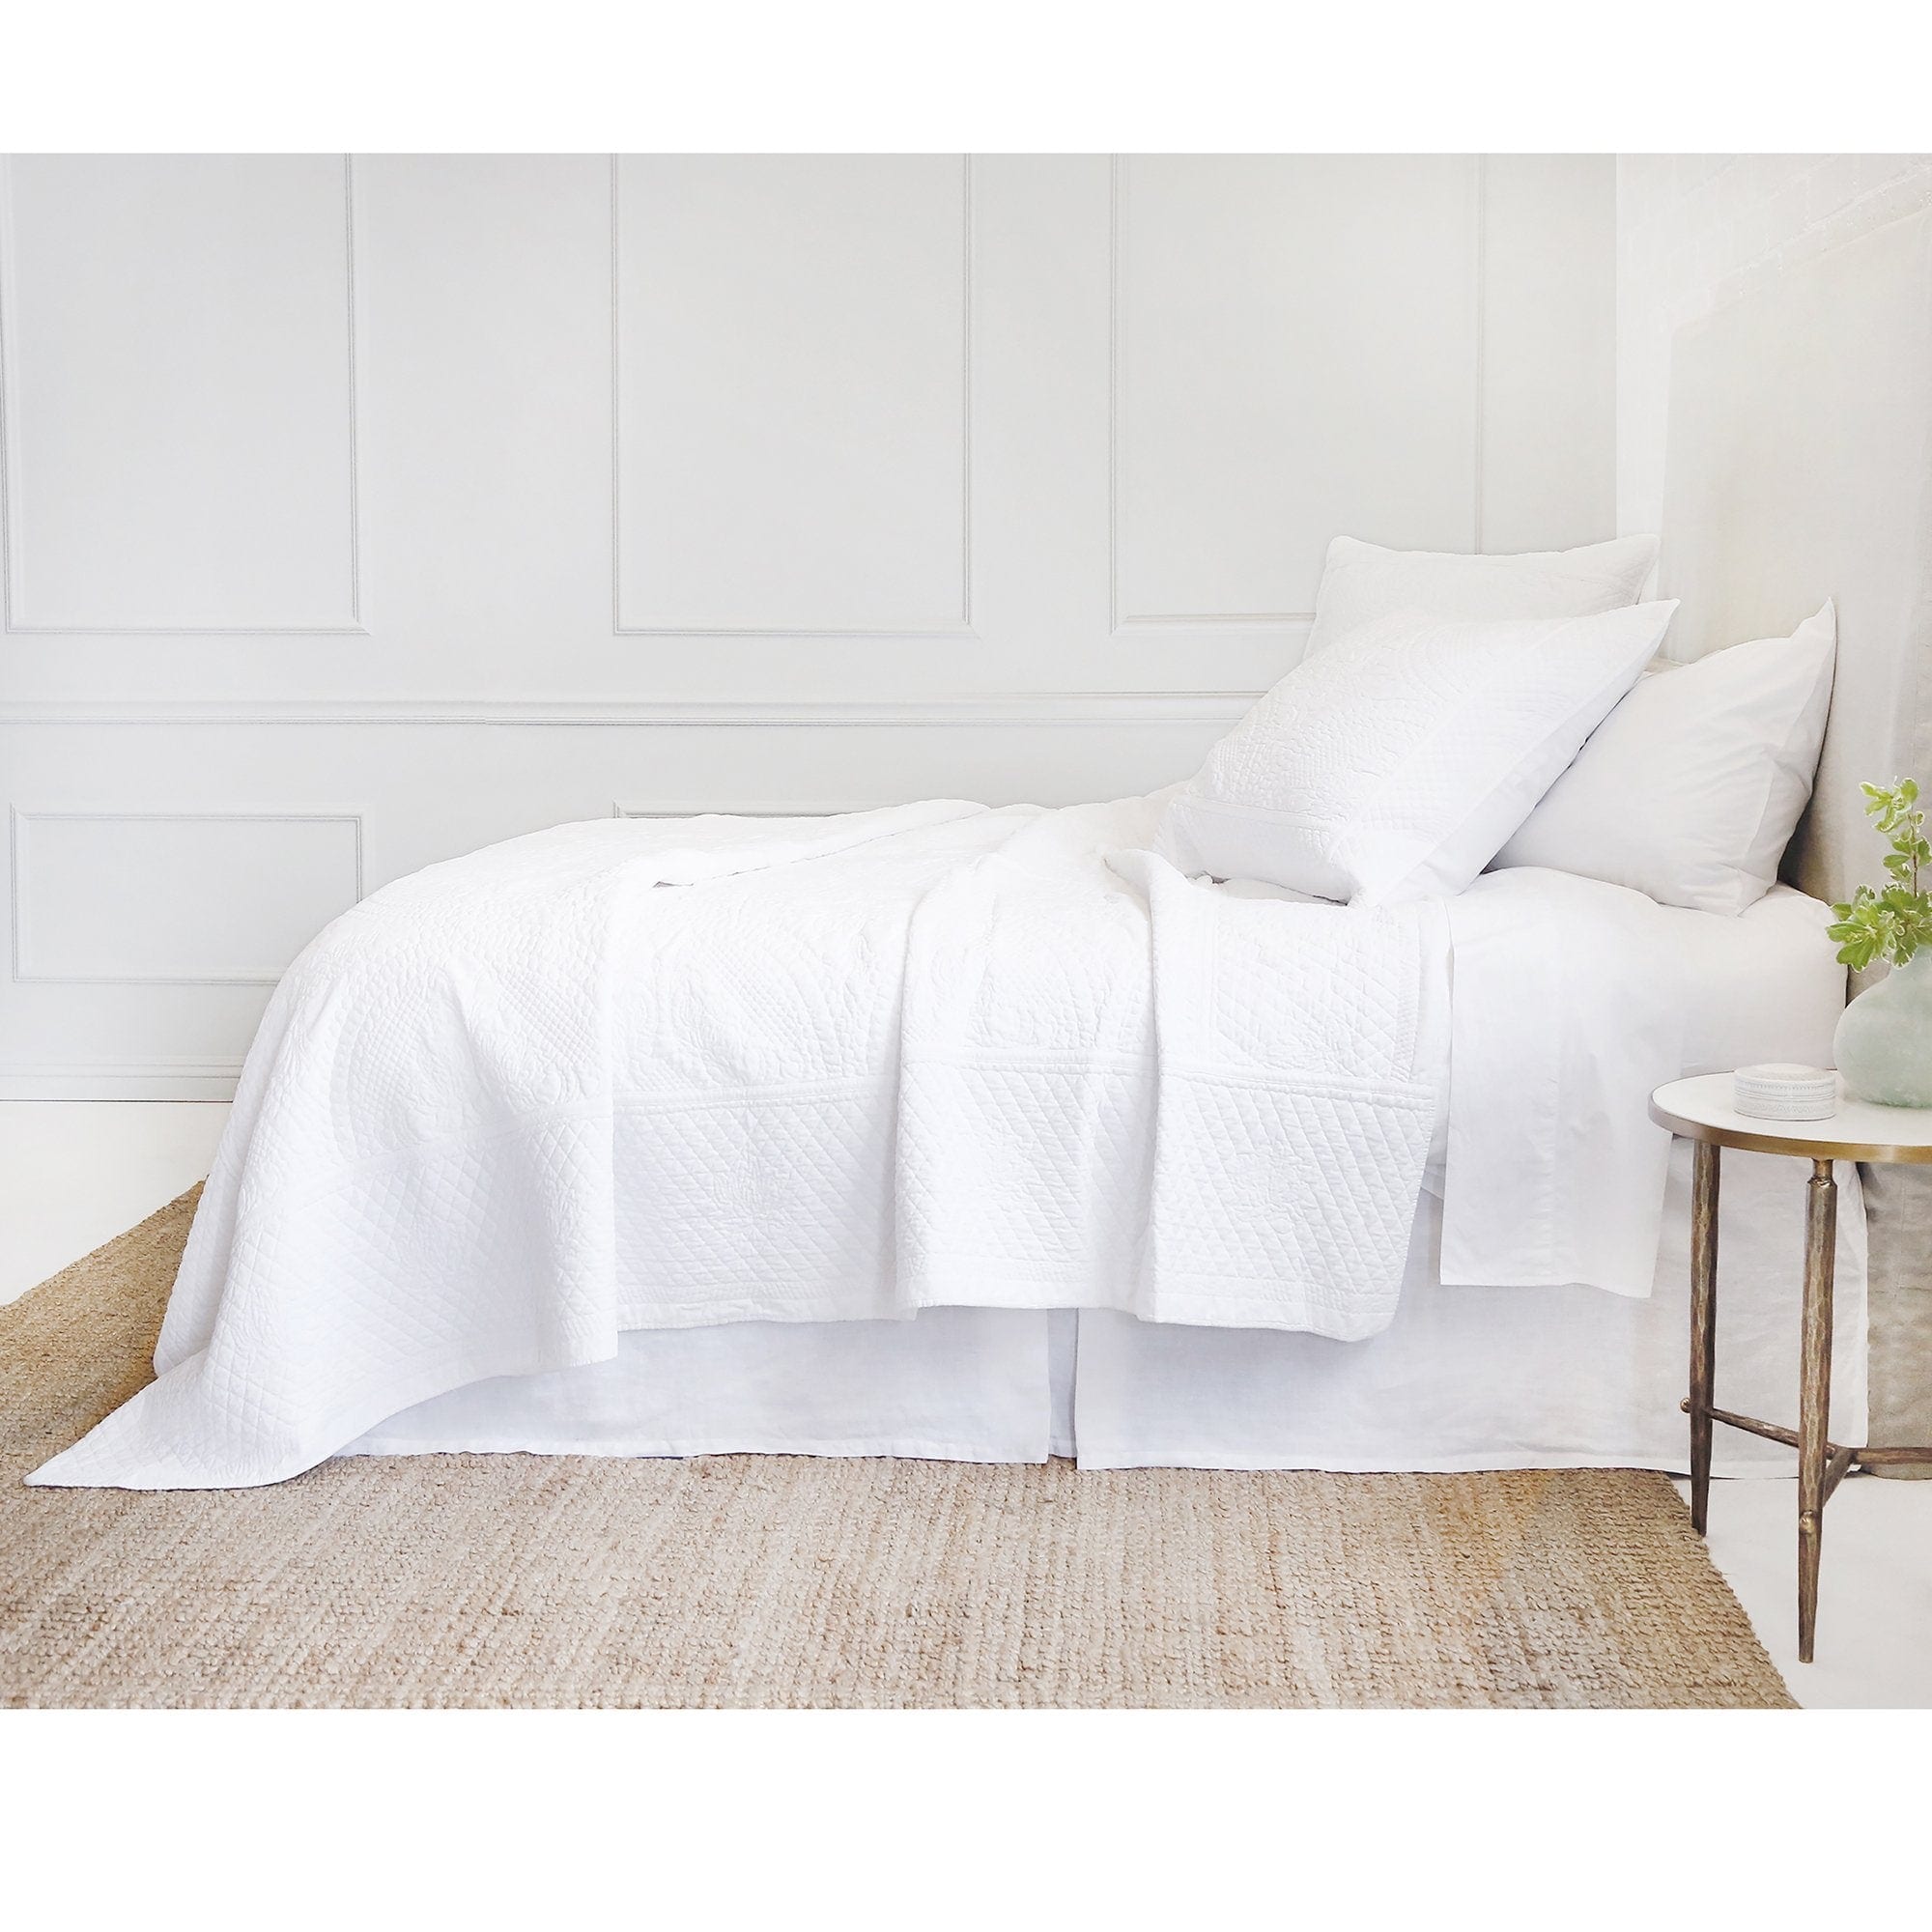 Fig Linens - Pom Pom at Home Marseille Bedding - White coverlets and large euro sham